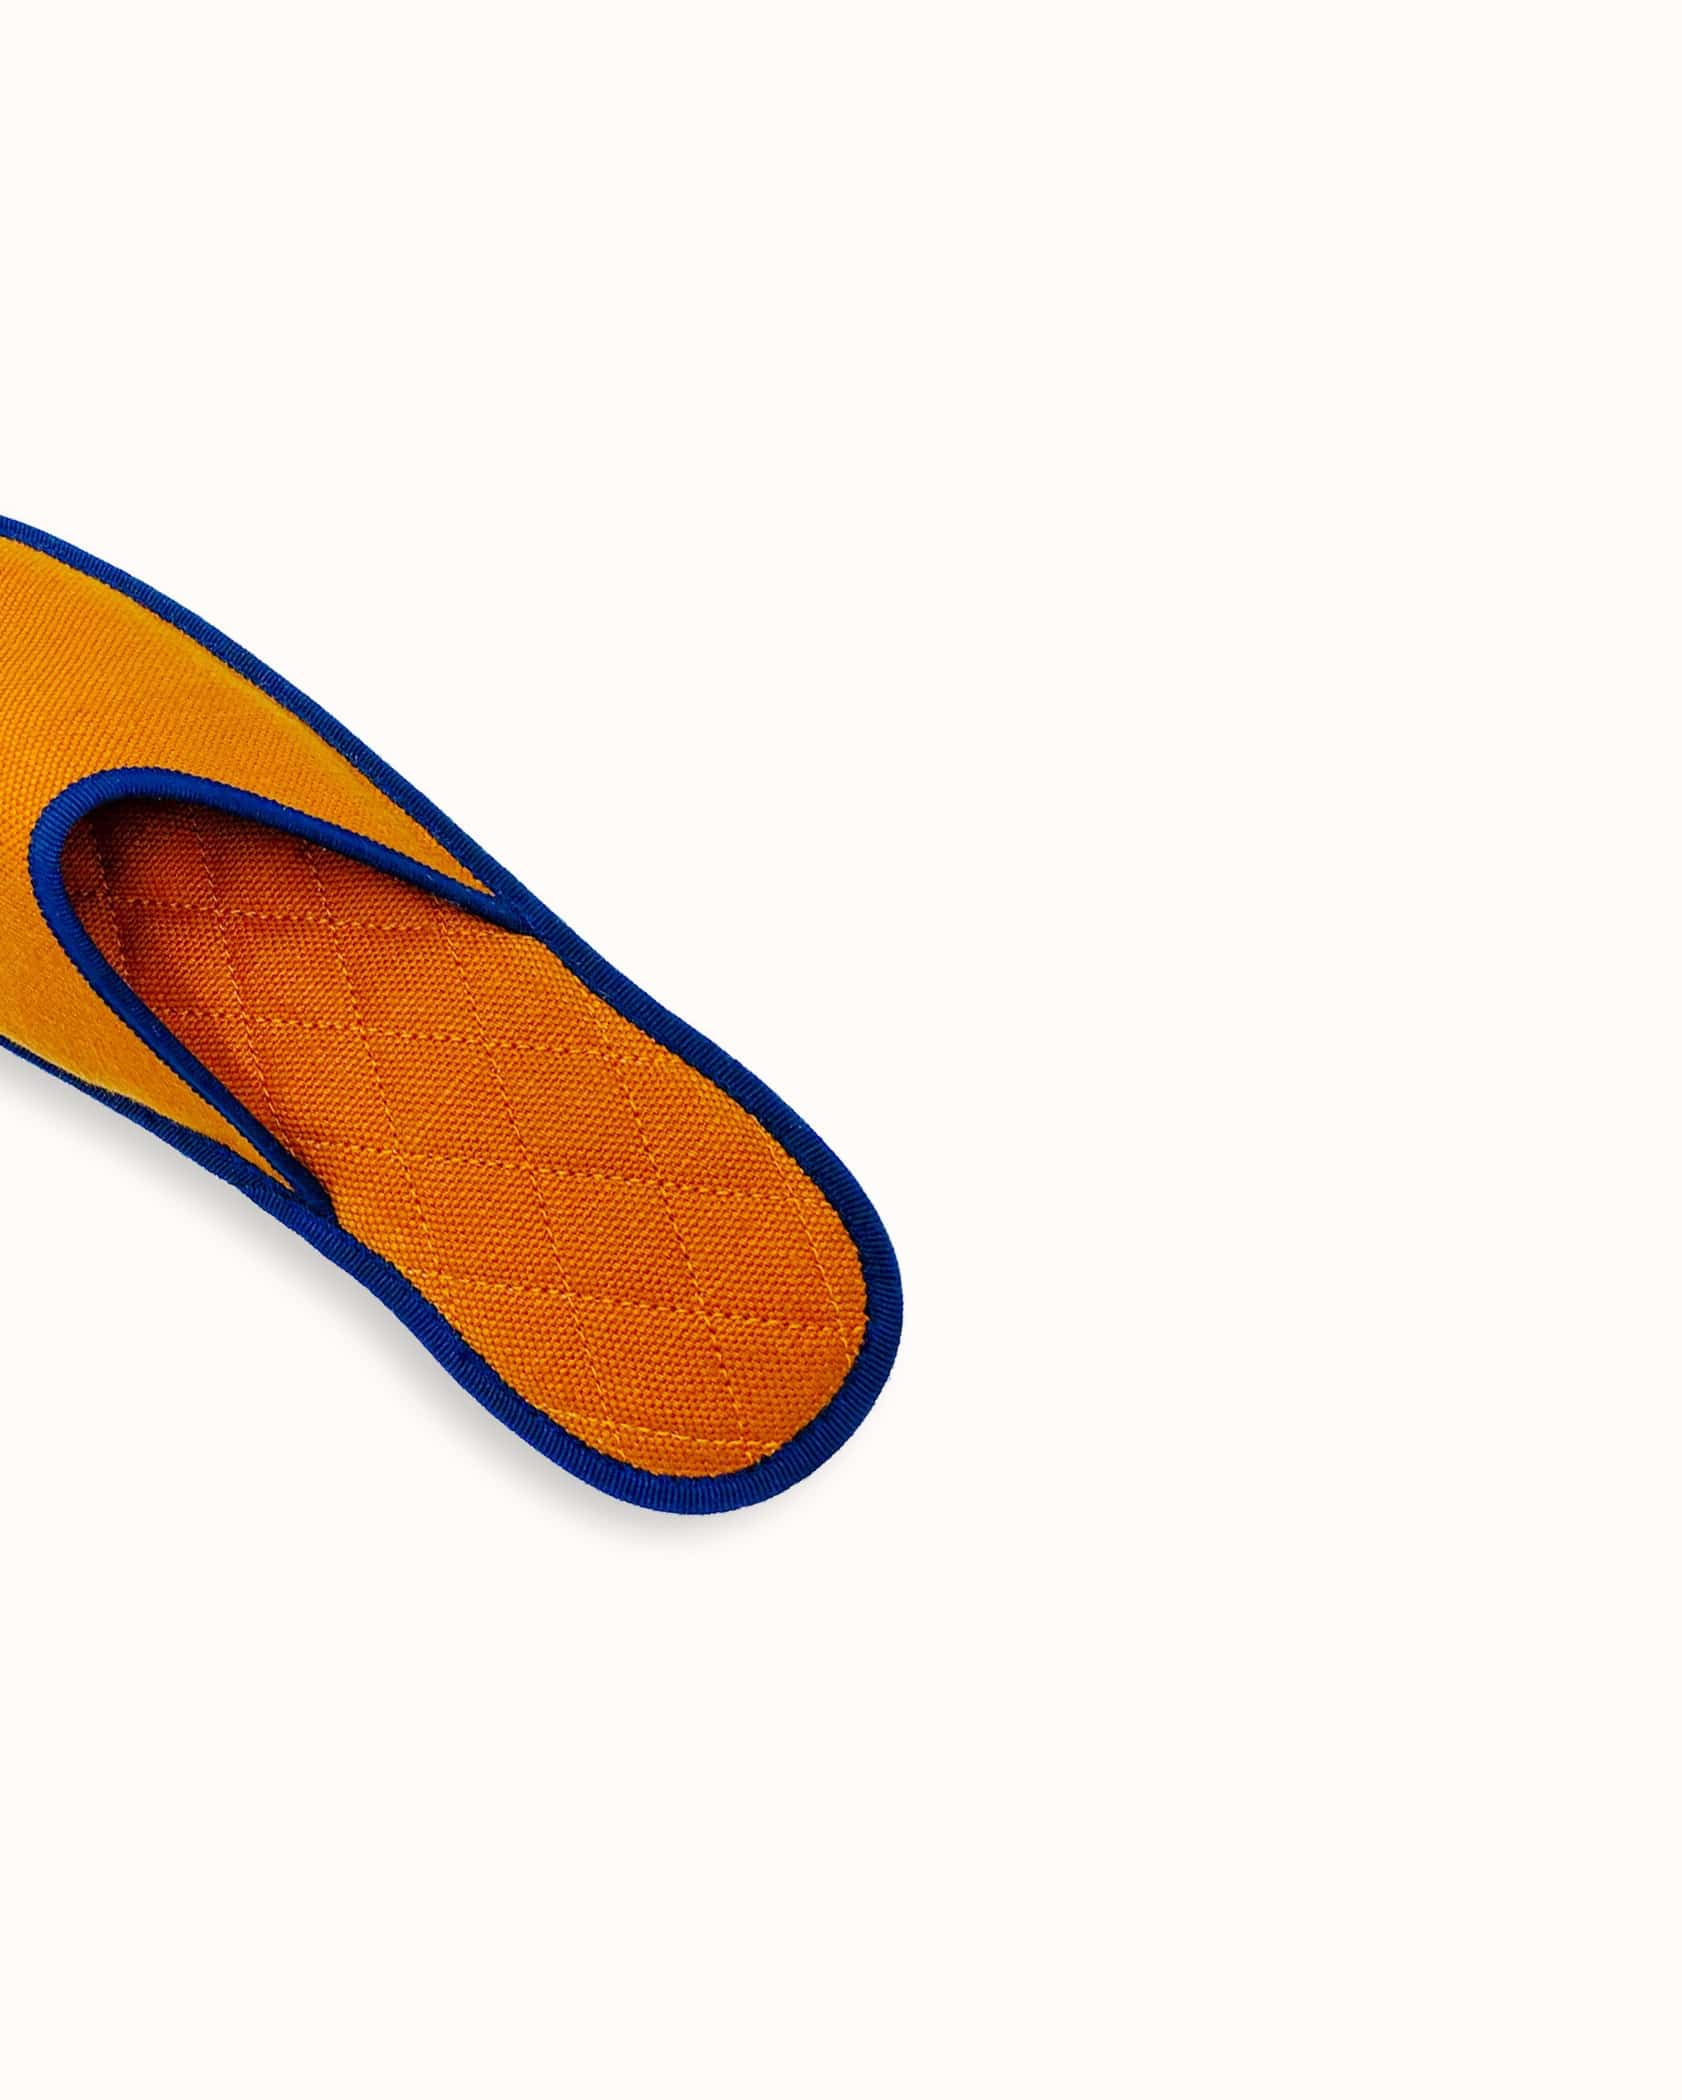 French slippers for men, women and kids. Le Spleen "Feu", orange and navy blue. A slip-on like hotel slippers with a quilted padding and an outstanding craftsmanship manufacturing. Made in France.